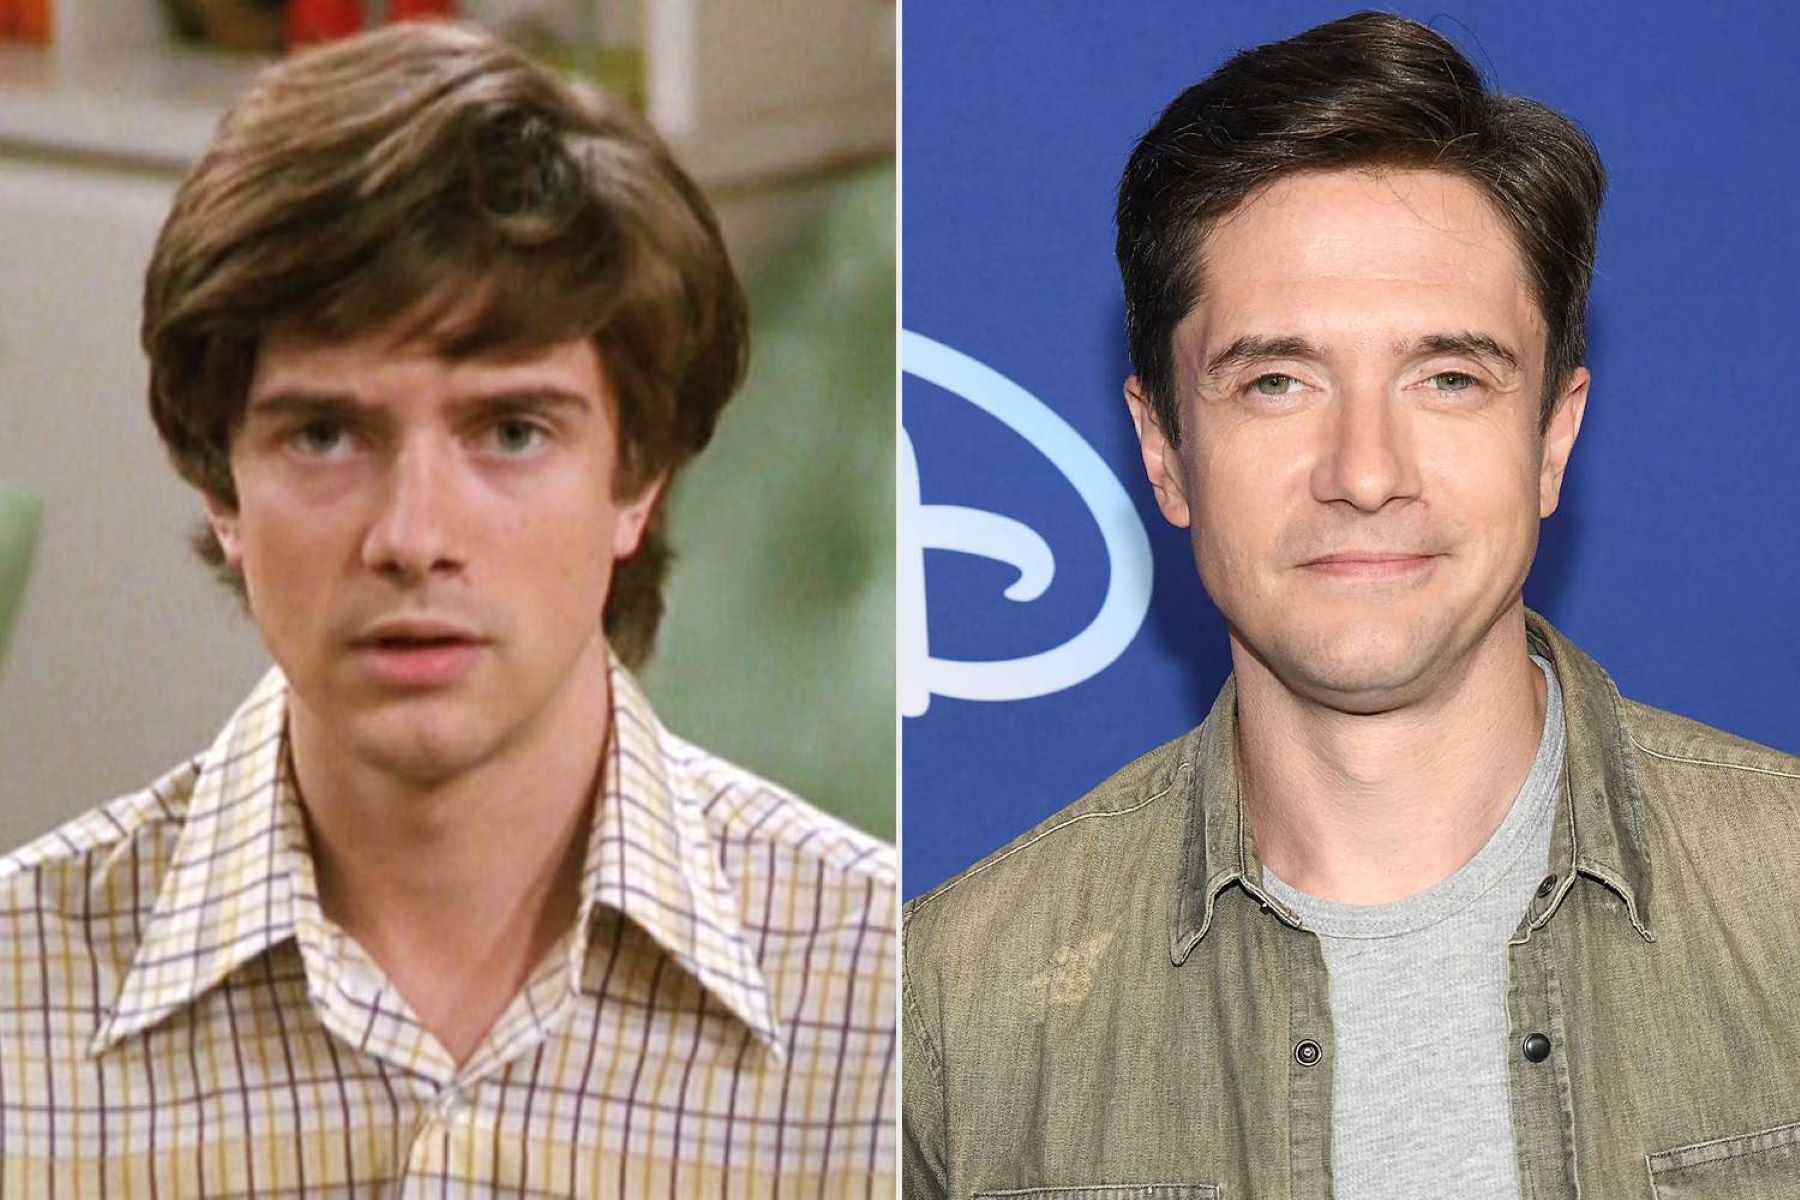 Topher Grace’s Isolation On ’70s Show’ Vindicated After Masterson Sentence